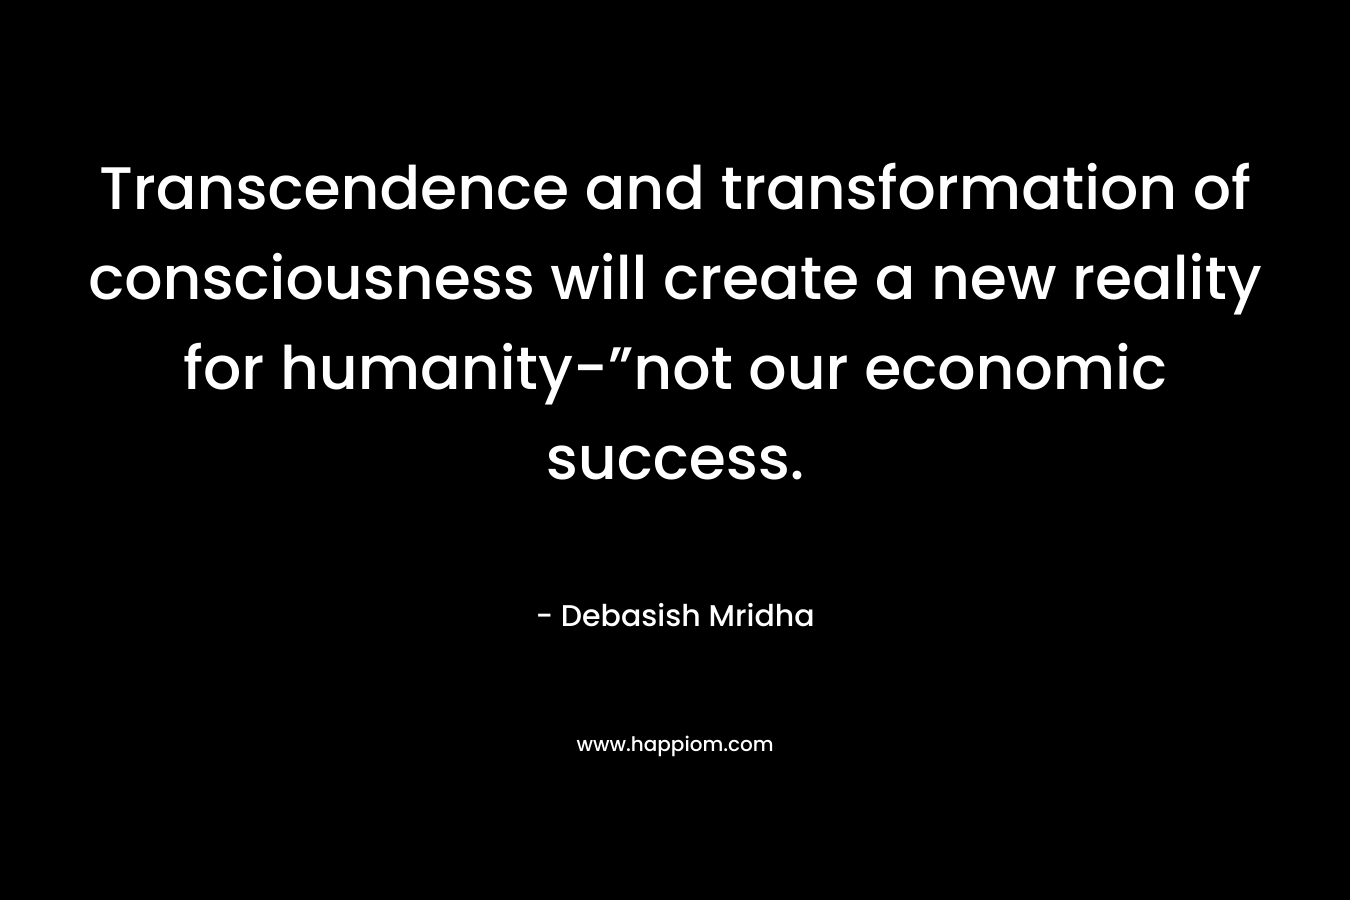 Transcendence and transformation of consciousness will create a new reality for humanity-”not our economic success. – Debasish Mridha